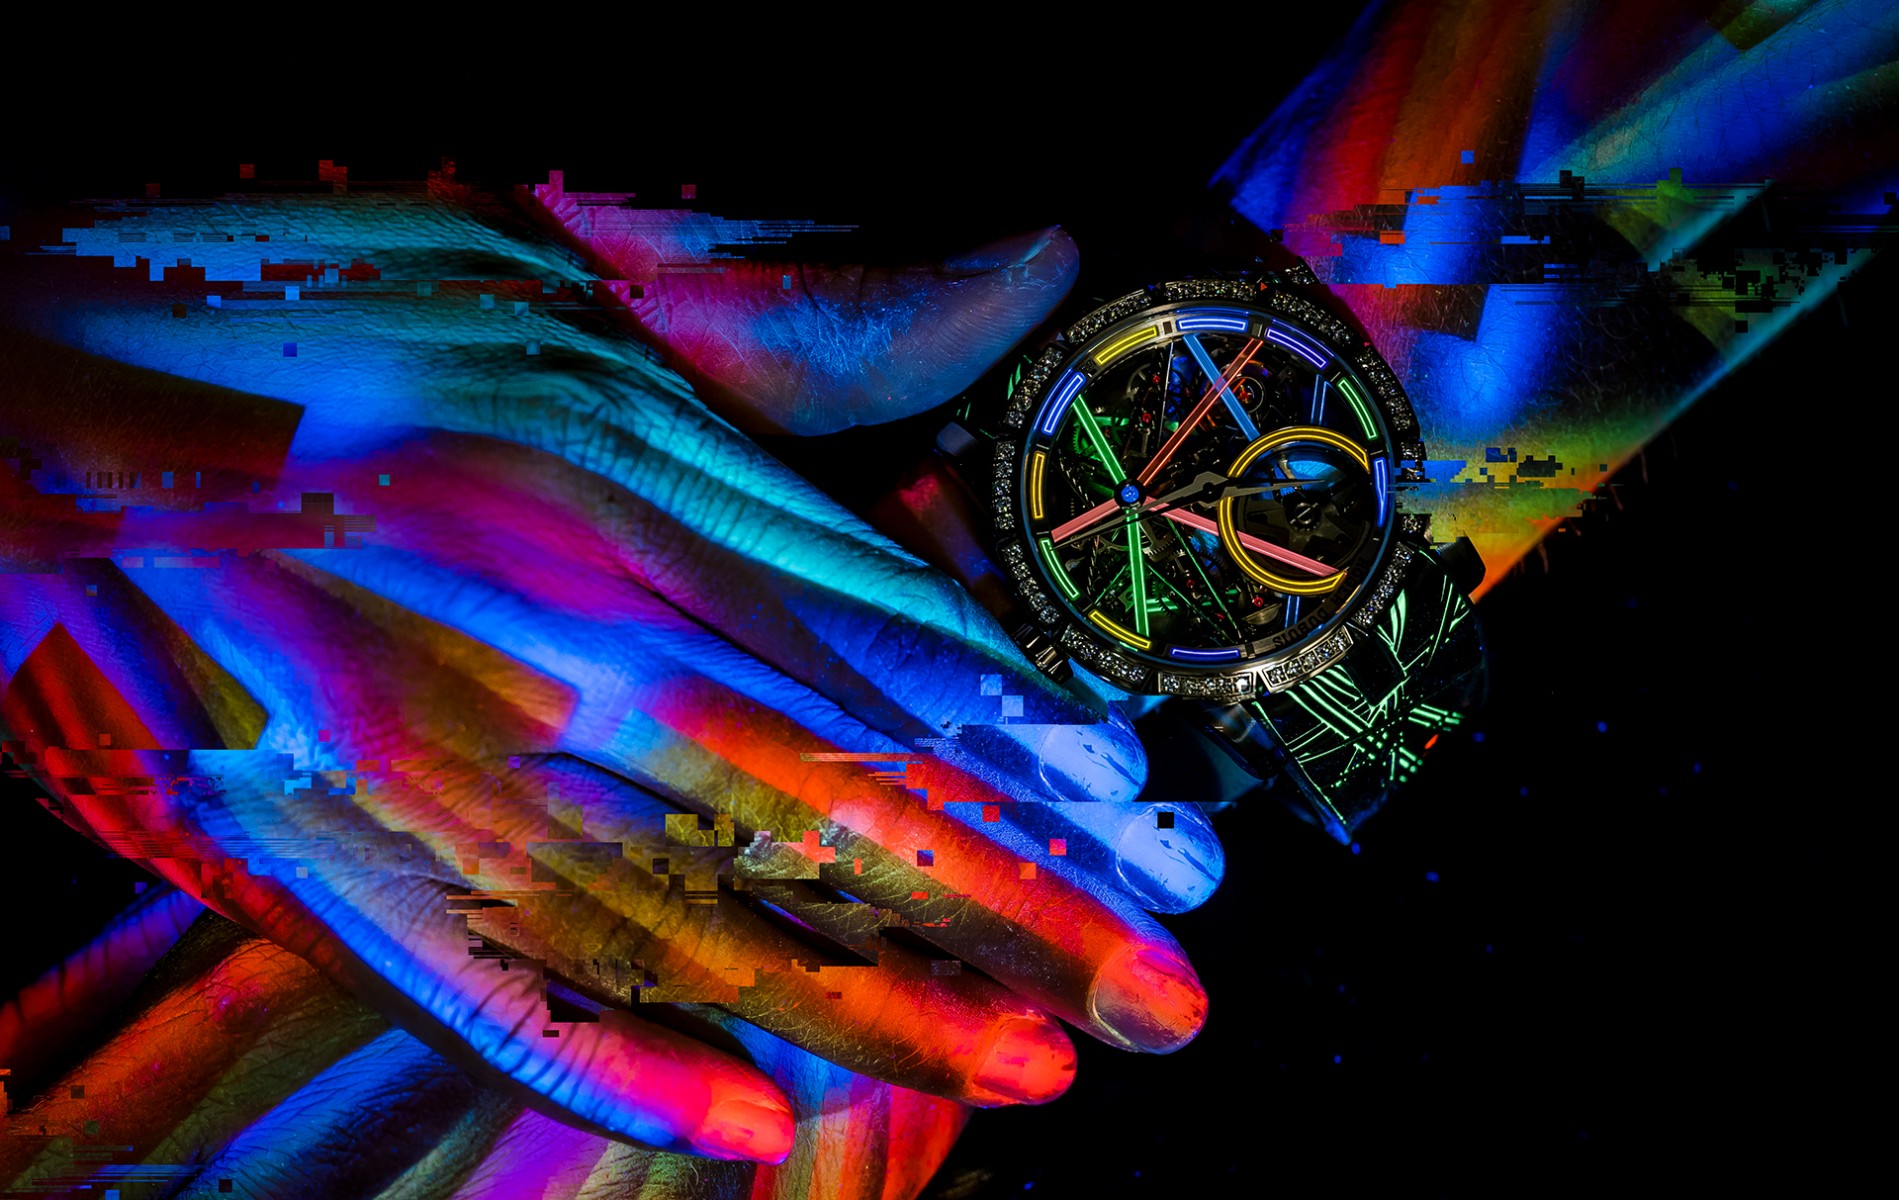 Roger Dubuis Pays Hommage To Vibrant City Lights With The New Excalibur Blacklight